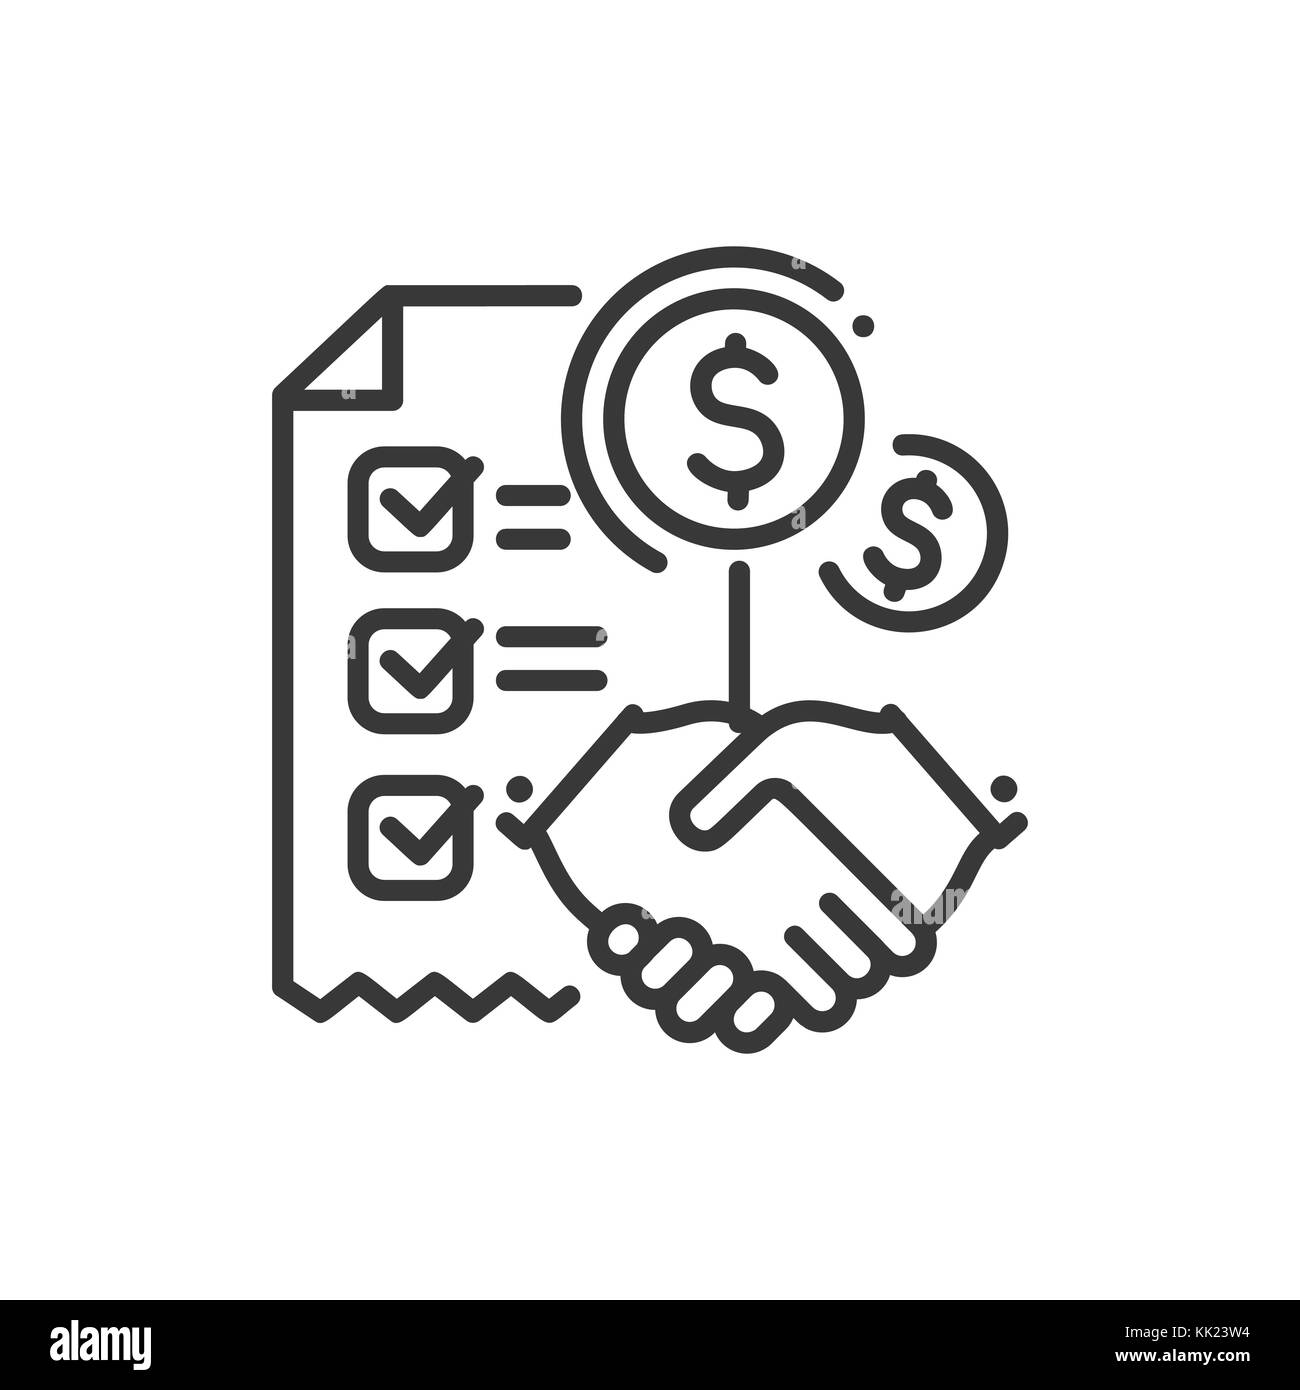 Contract - line design single isolated icon Stock Vector